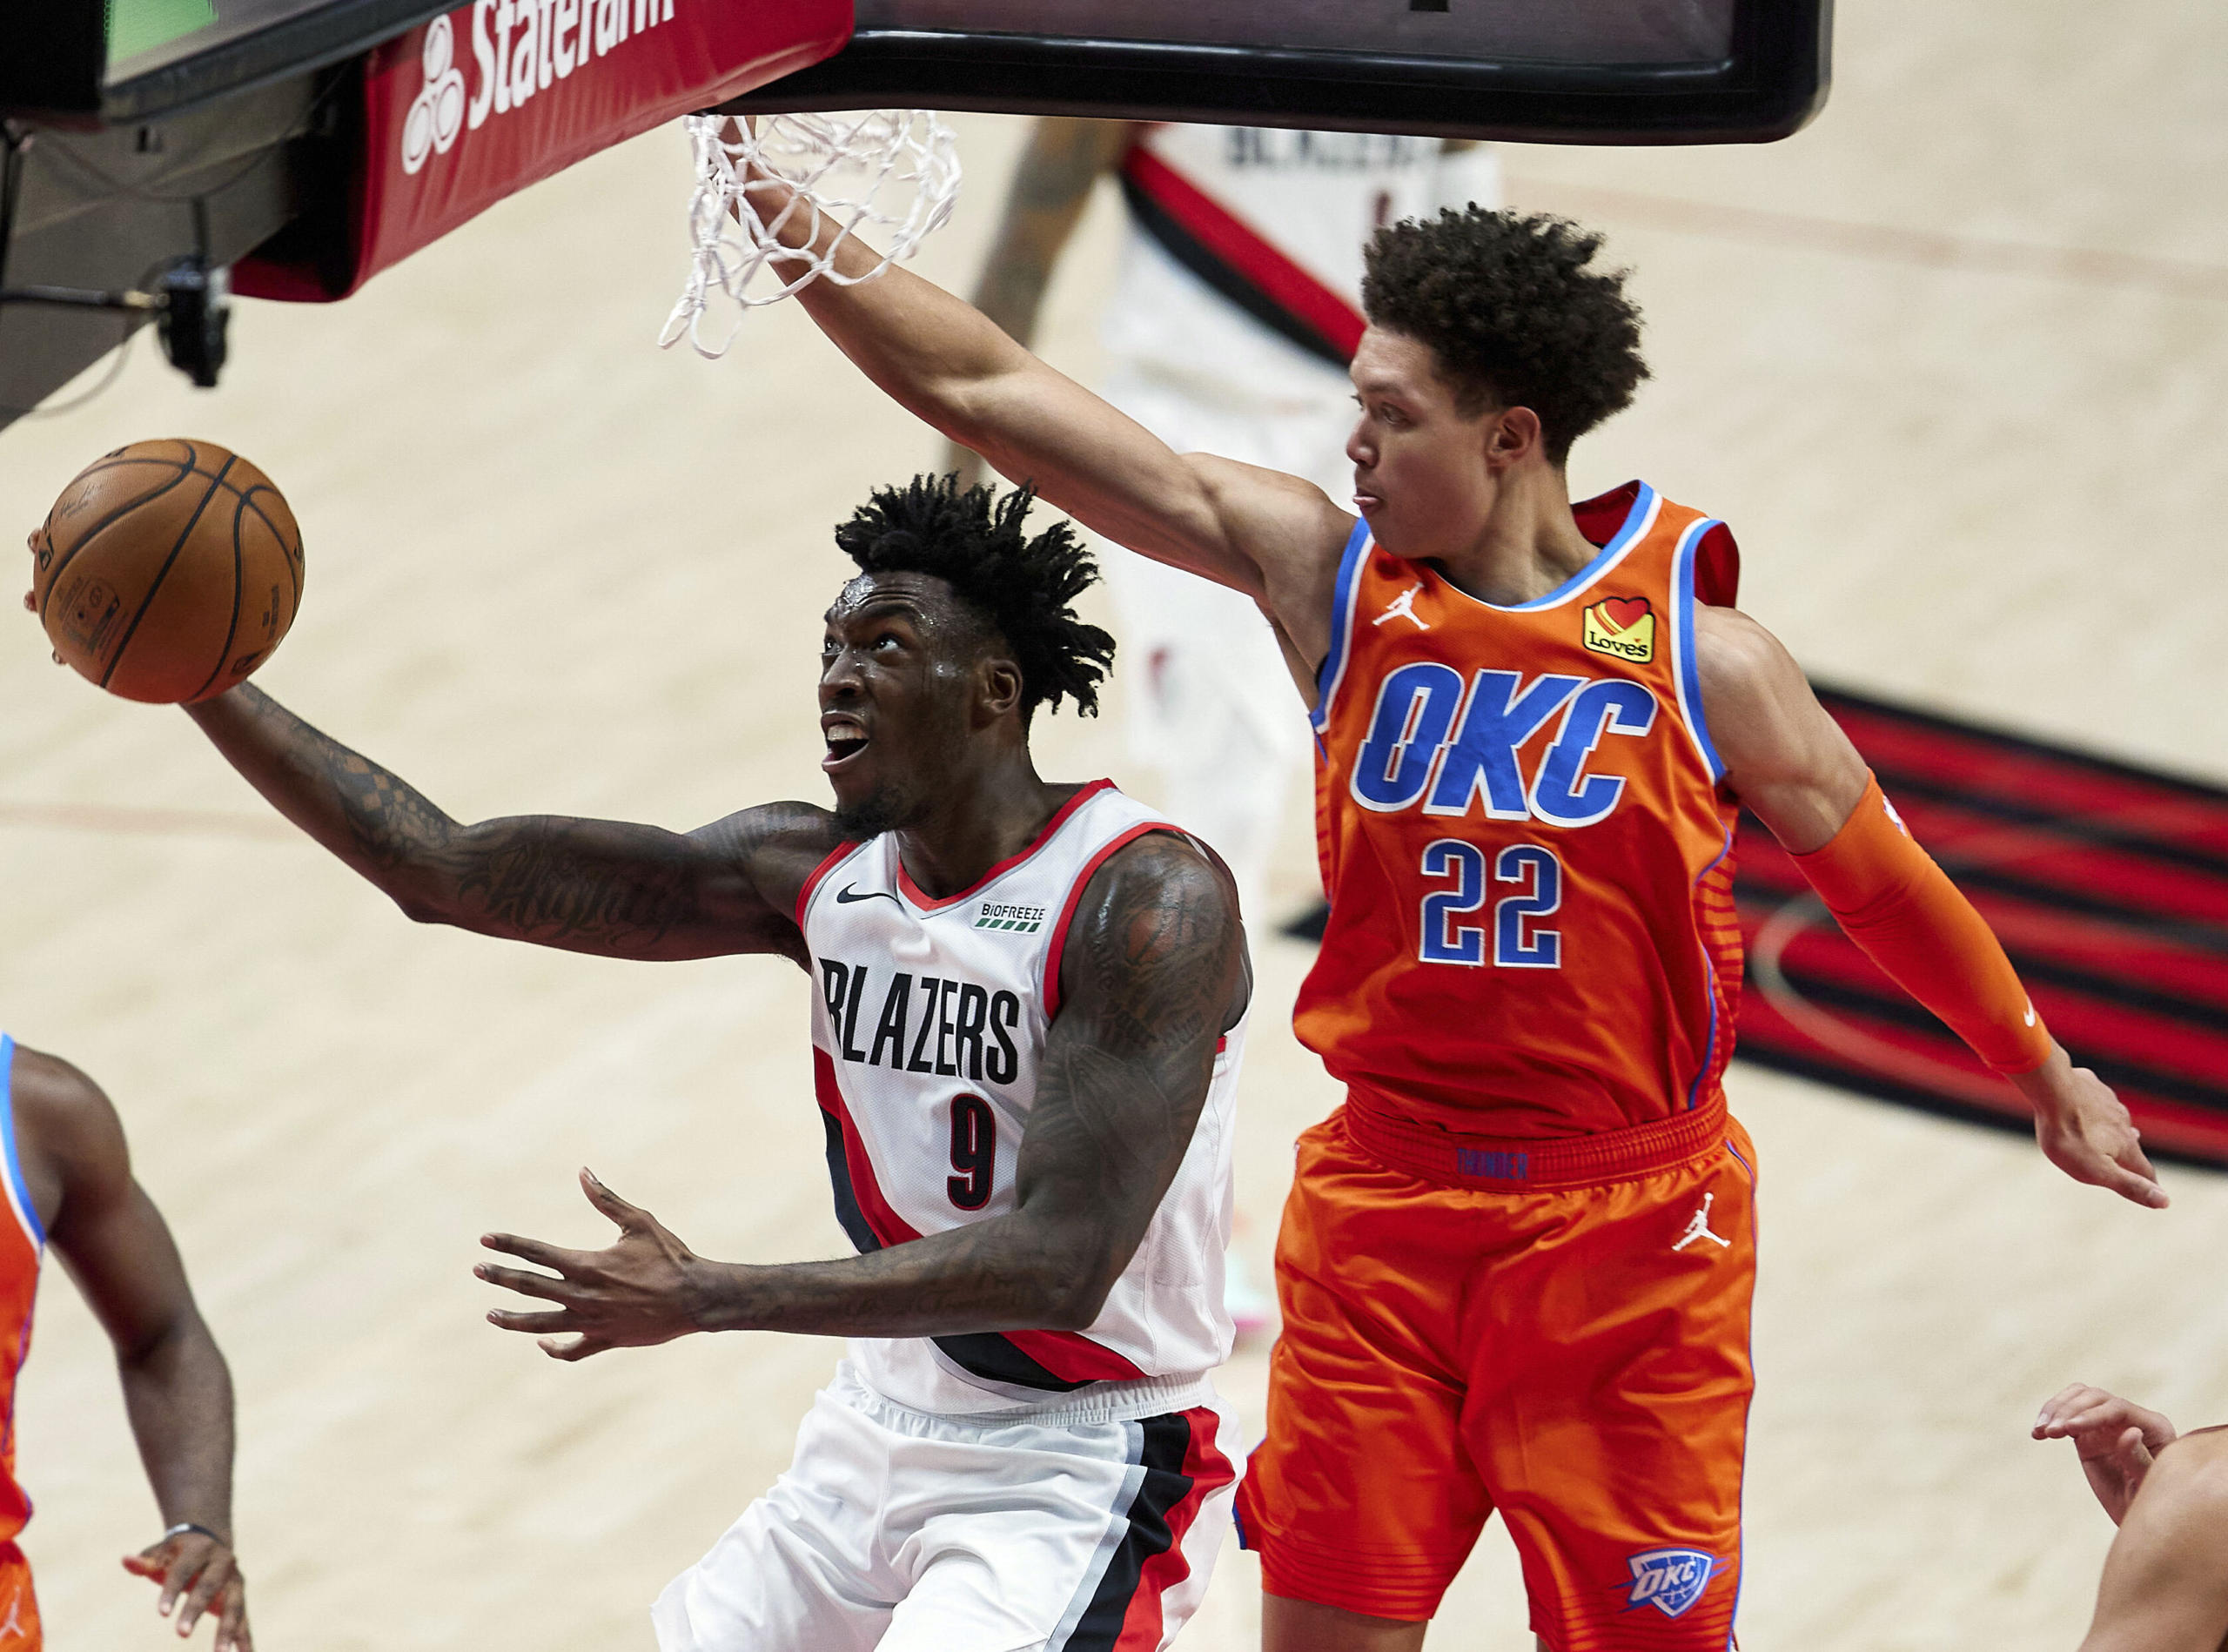 Portland Trail Blazers forward Nassir Little, left, shoots in front of Oklahoma City Thunder forward Isaiah Roby during the first half of an NBA basketball game in Portland, Ore., Monday, Jan. 25, 2021.